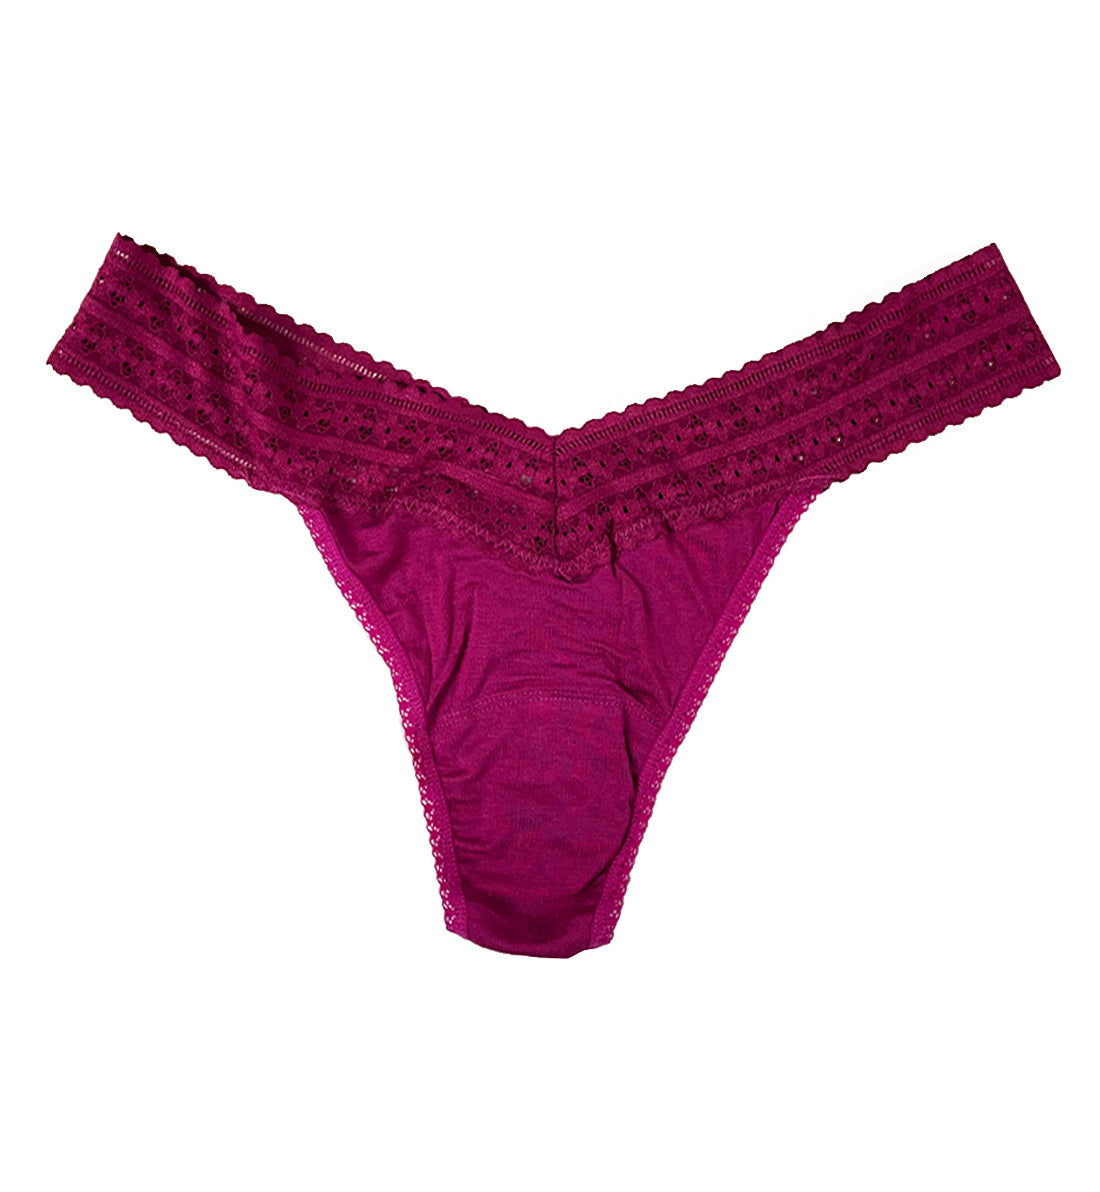 Hanky Panky Dream Original Rise Thong (631104),Pink Ruby - Pink Ruby,One Size